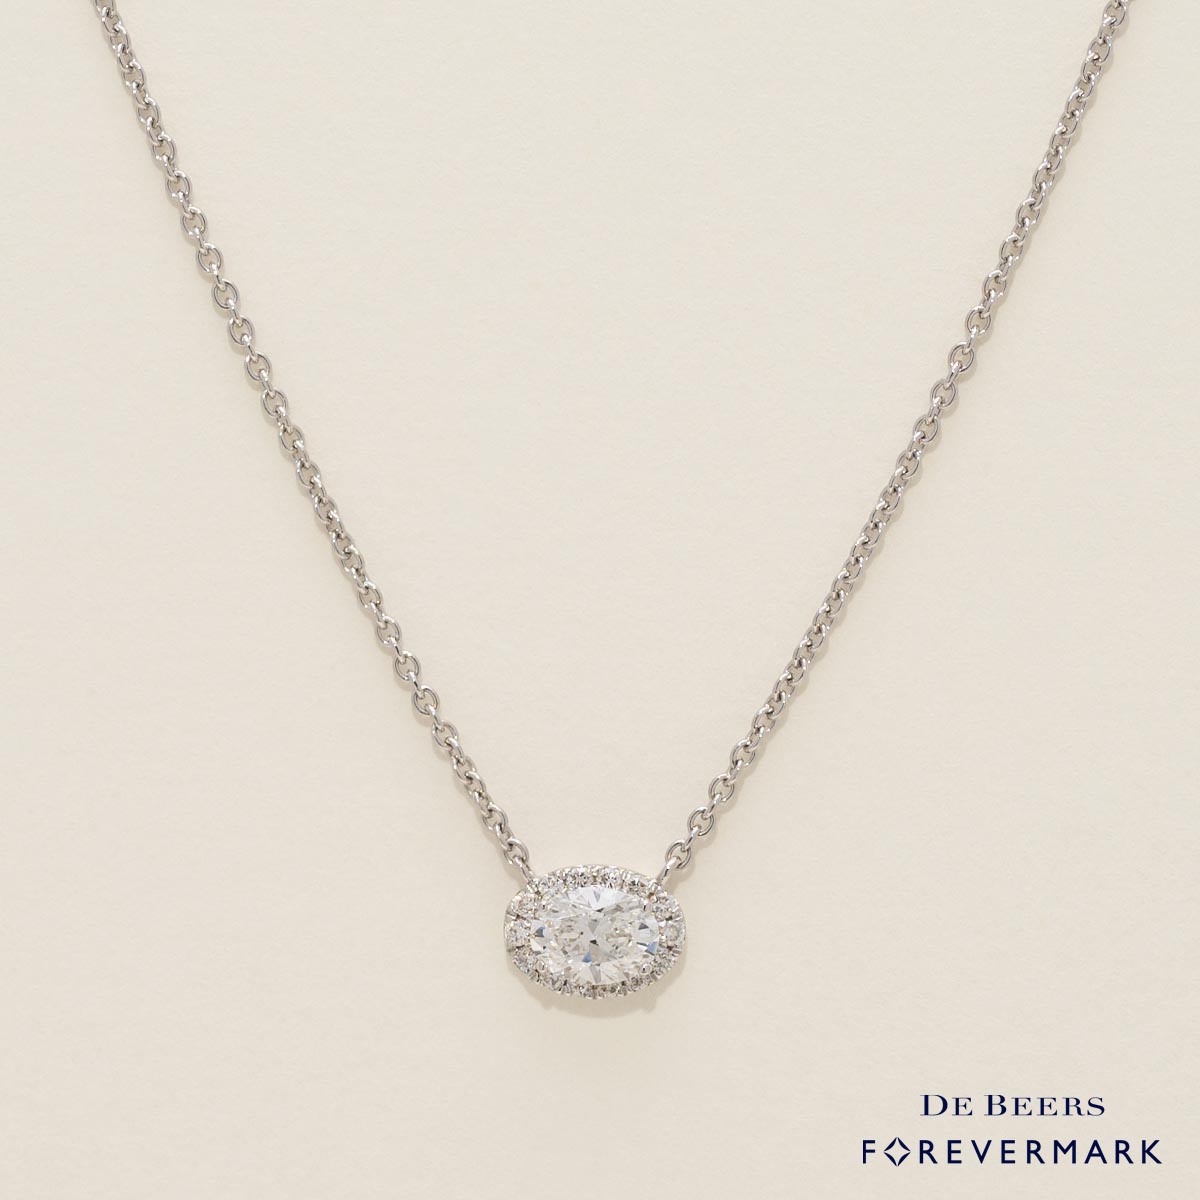 De Beers Forevermark Oval Diamond Halo Necklace in 18kt White Gold (3/8ct tw)